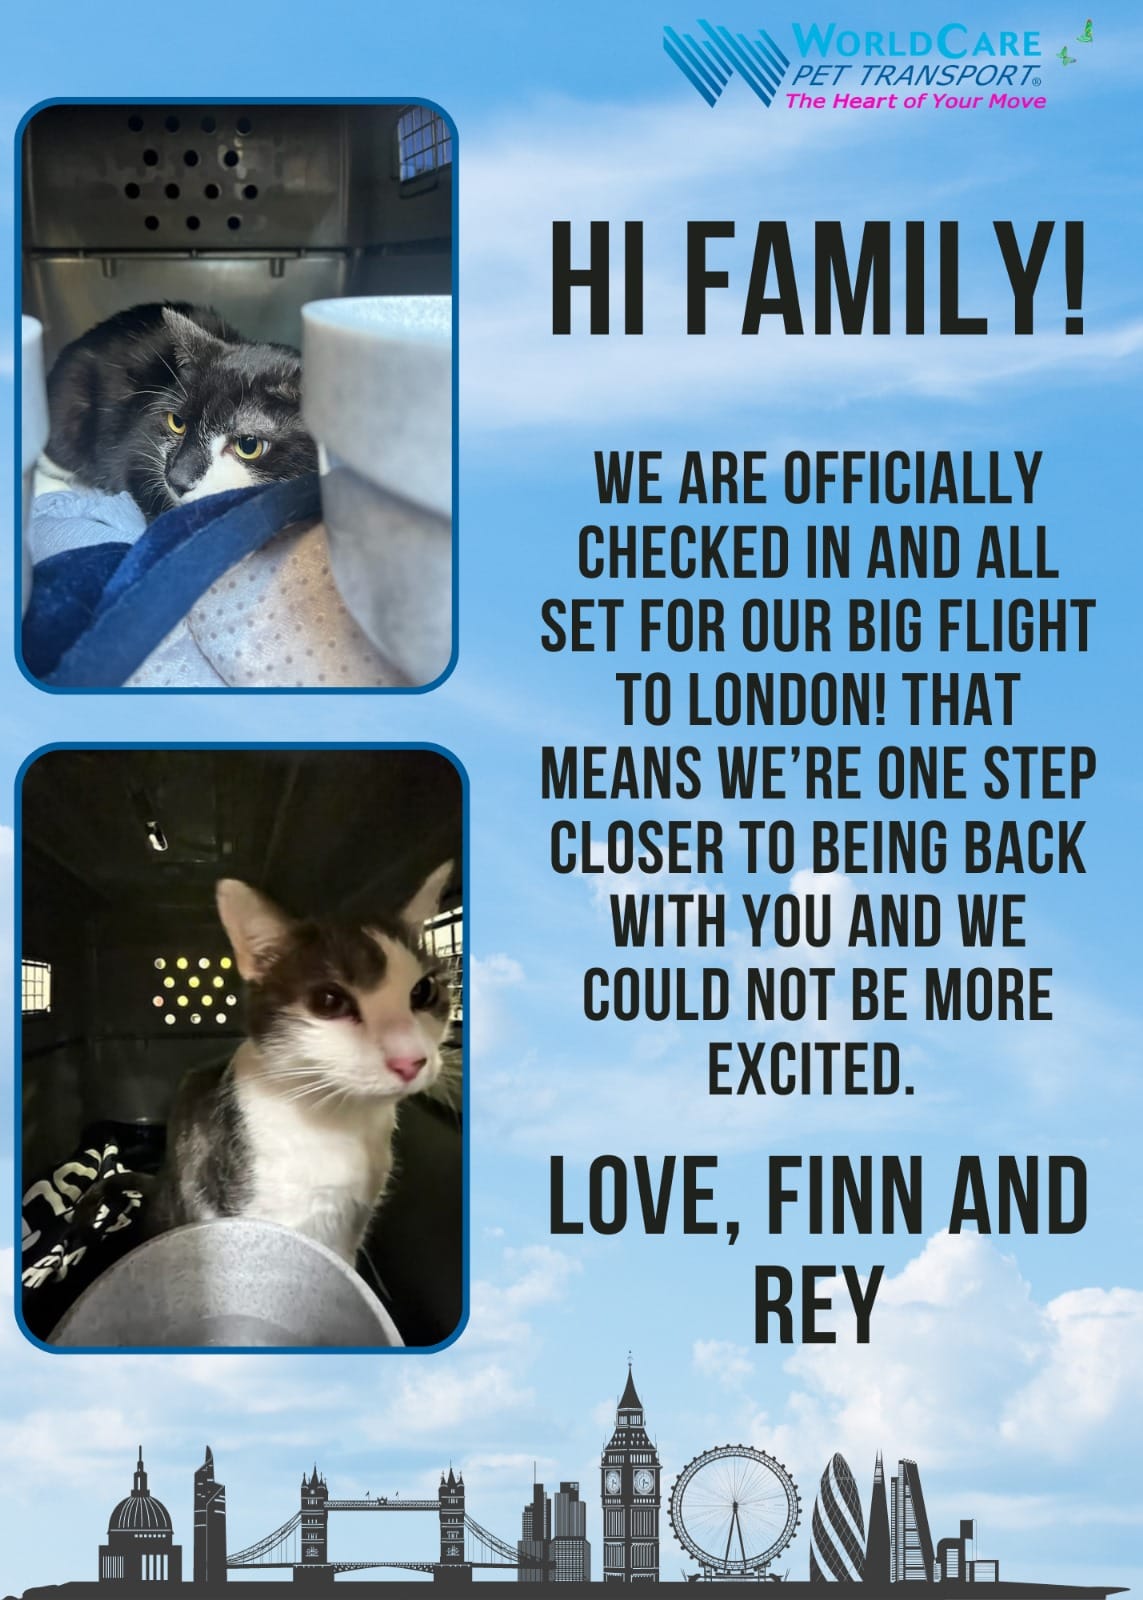 A graphic from WorldCare Pet Transport featuring two chaotic images of our cats in their crates before takeoff and the message "Hi Family! We are officially checked in and all set for our big flight to London! That means we're one step closer to being back with you and we could not be more excited. Love, Finn and Rey"